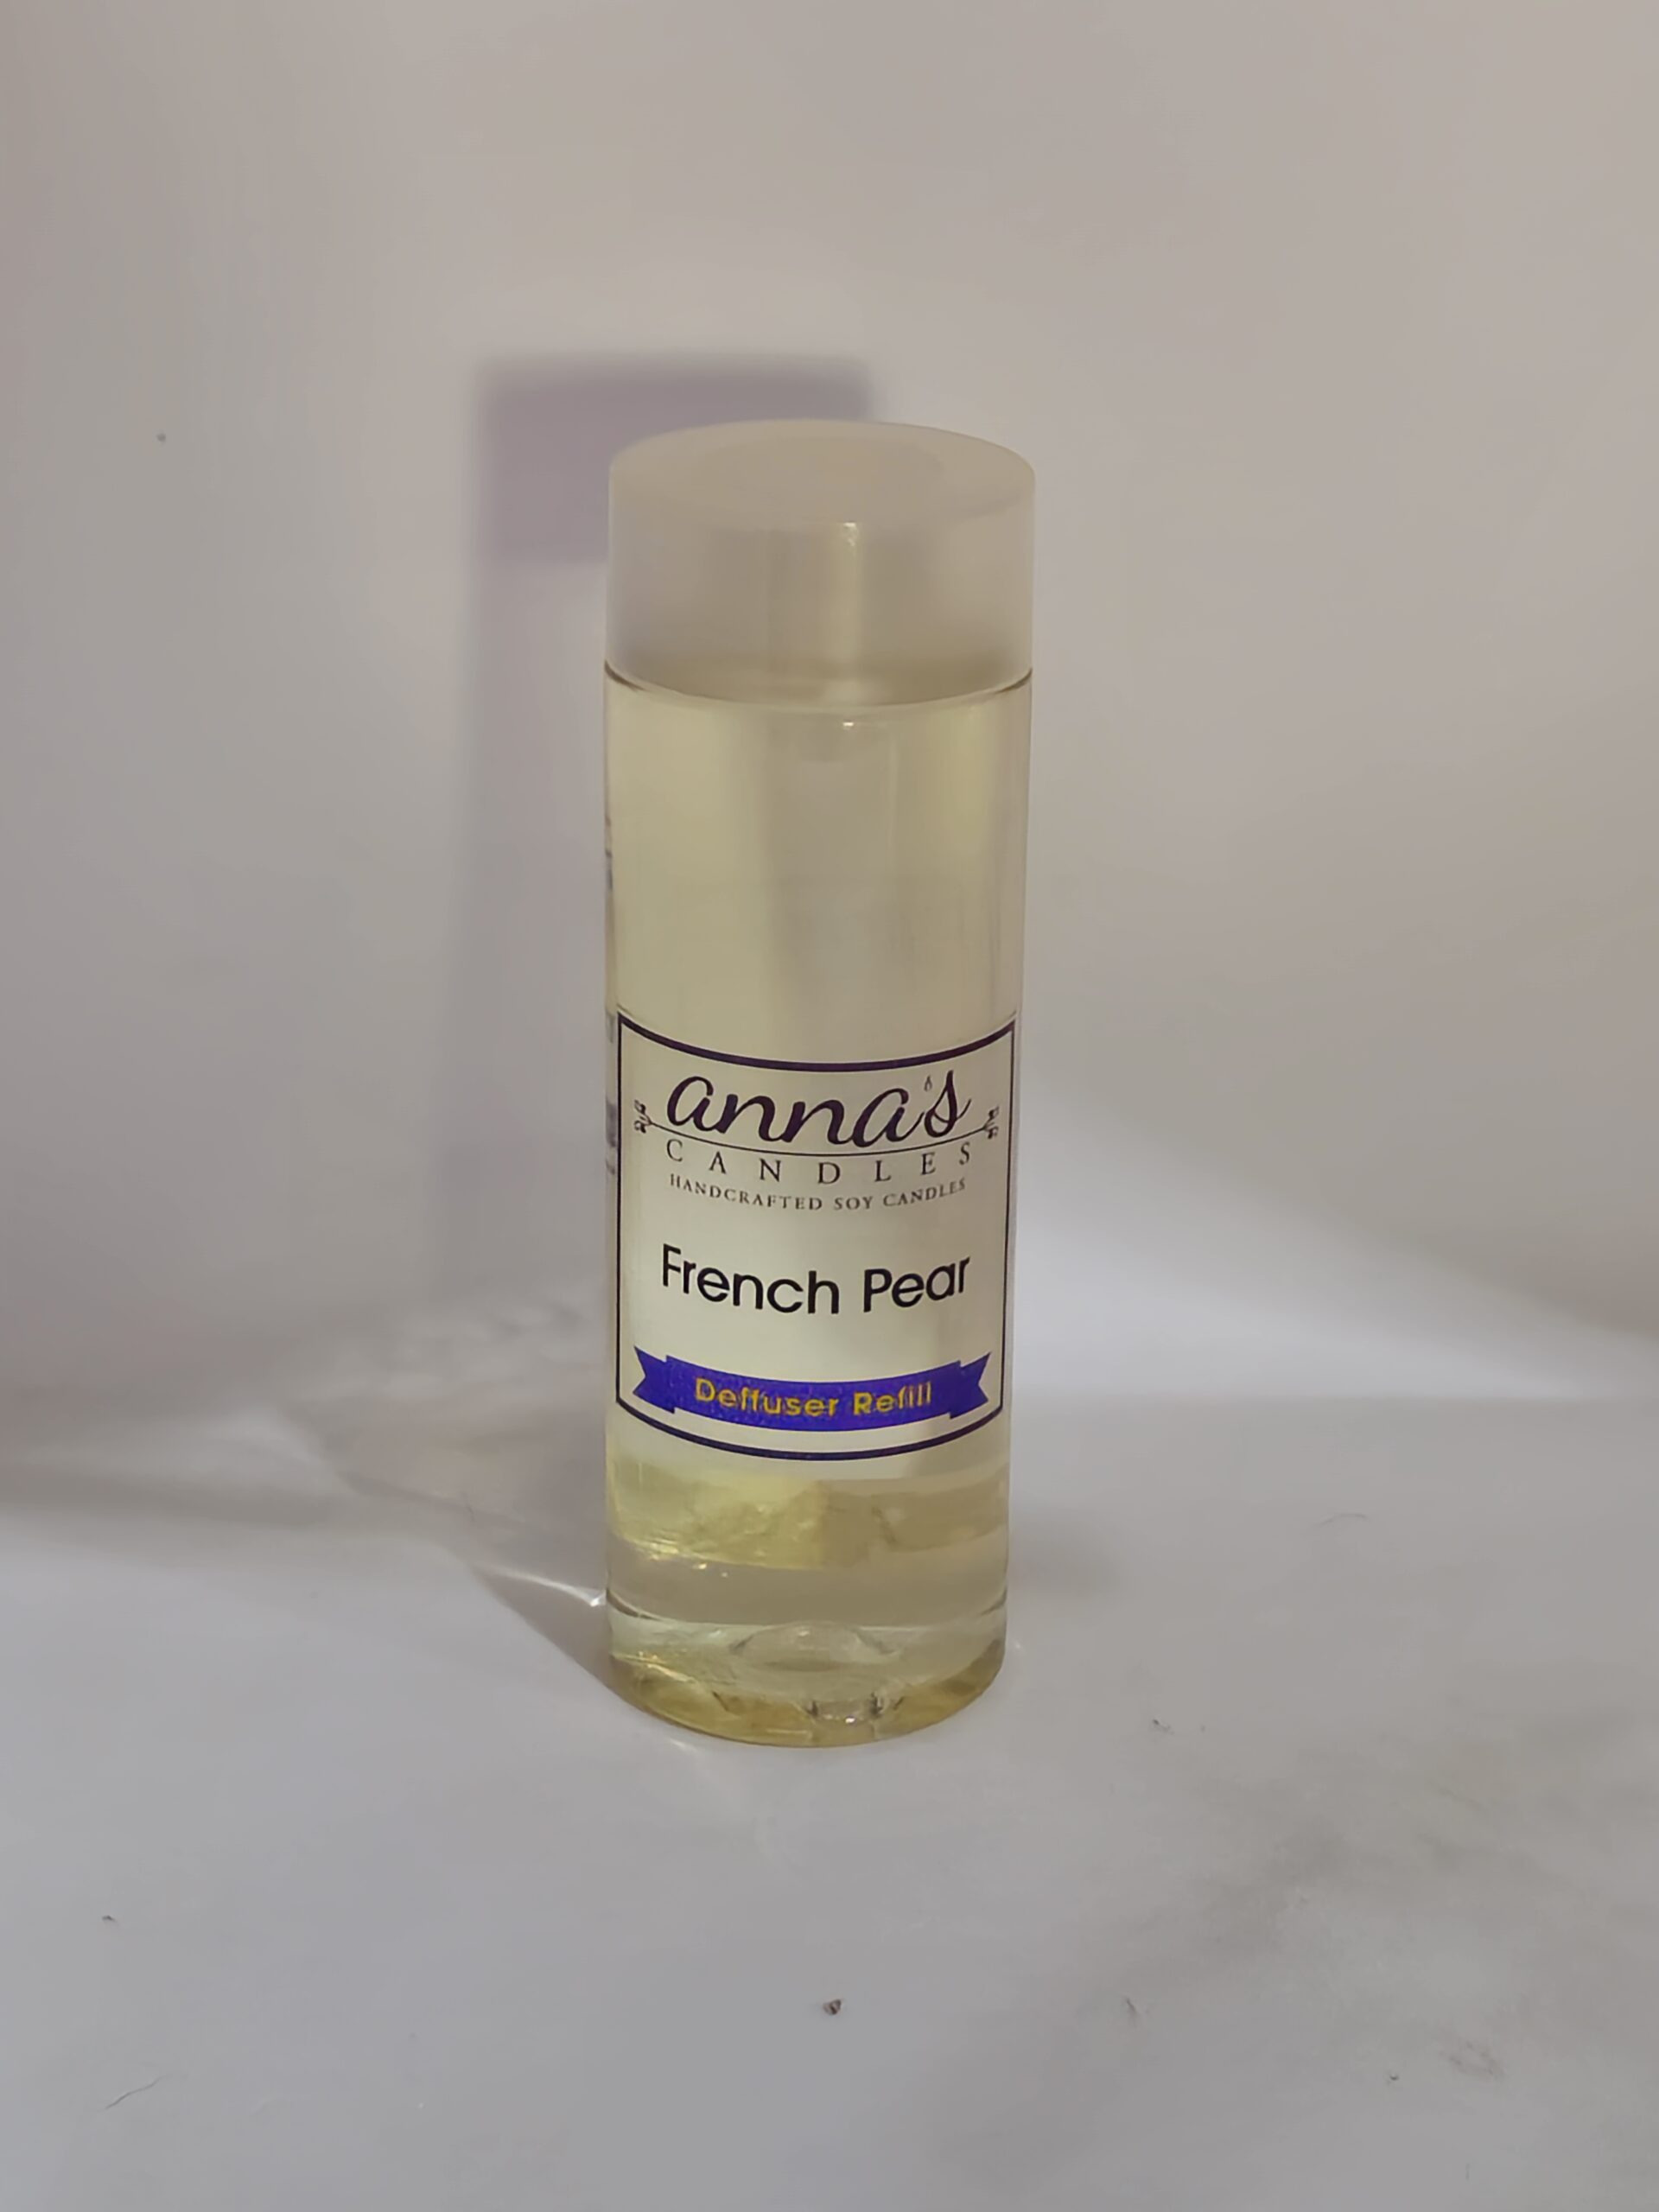 French Pear Diffuser Refill